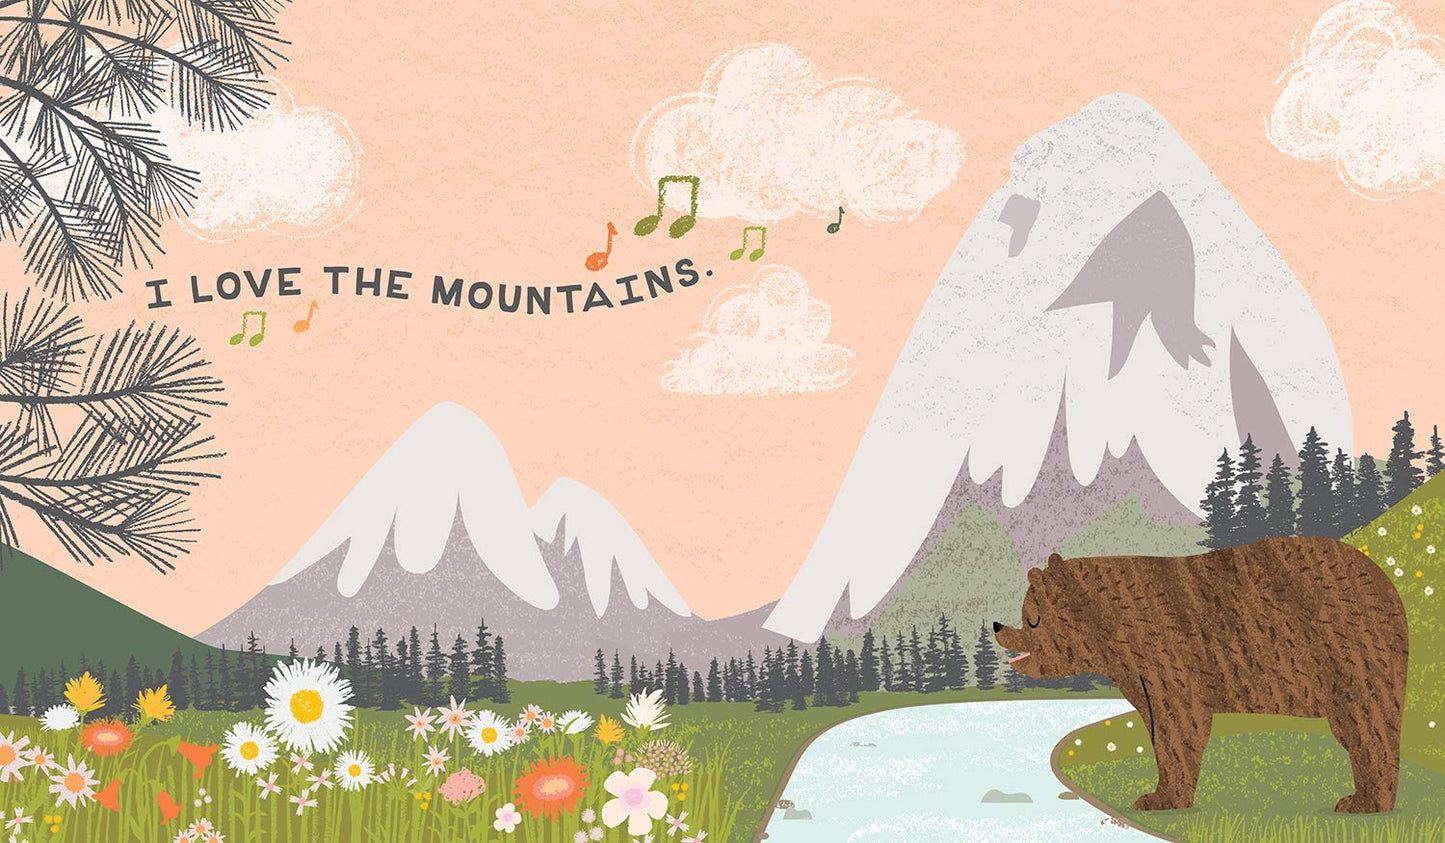 I Love the Mountains - By Hailey Meyers